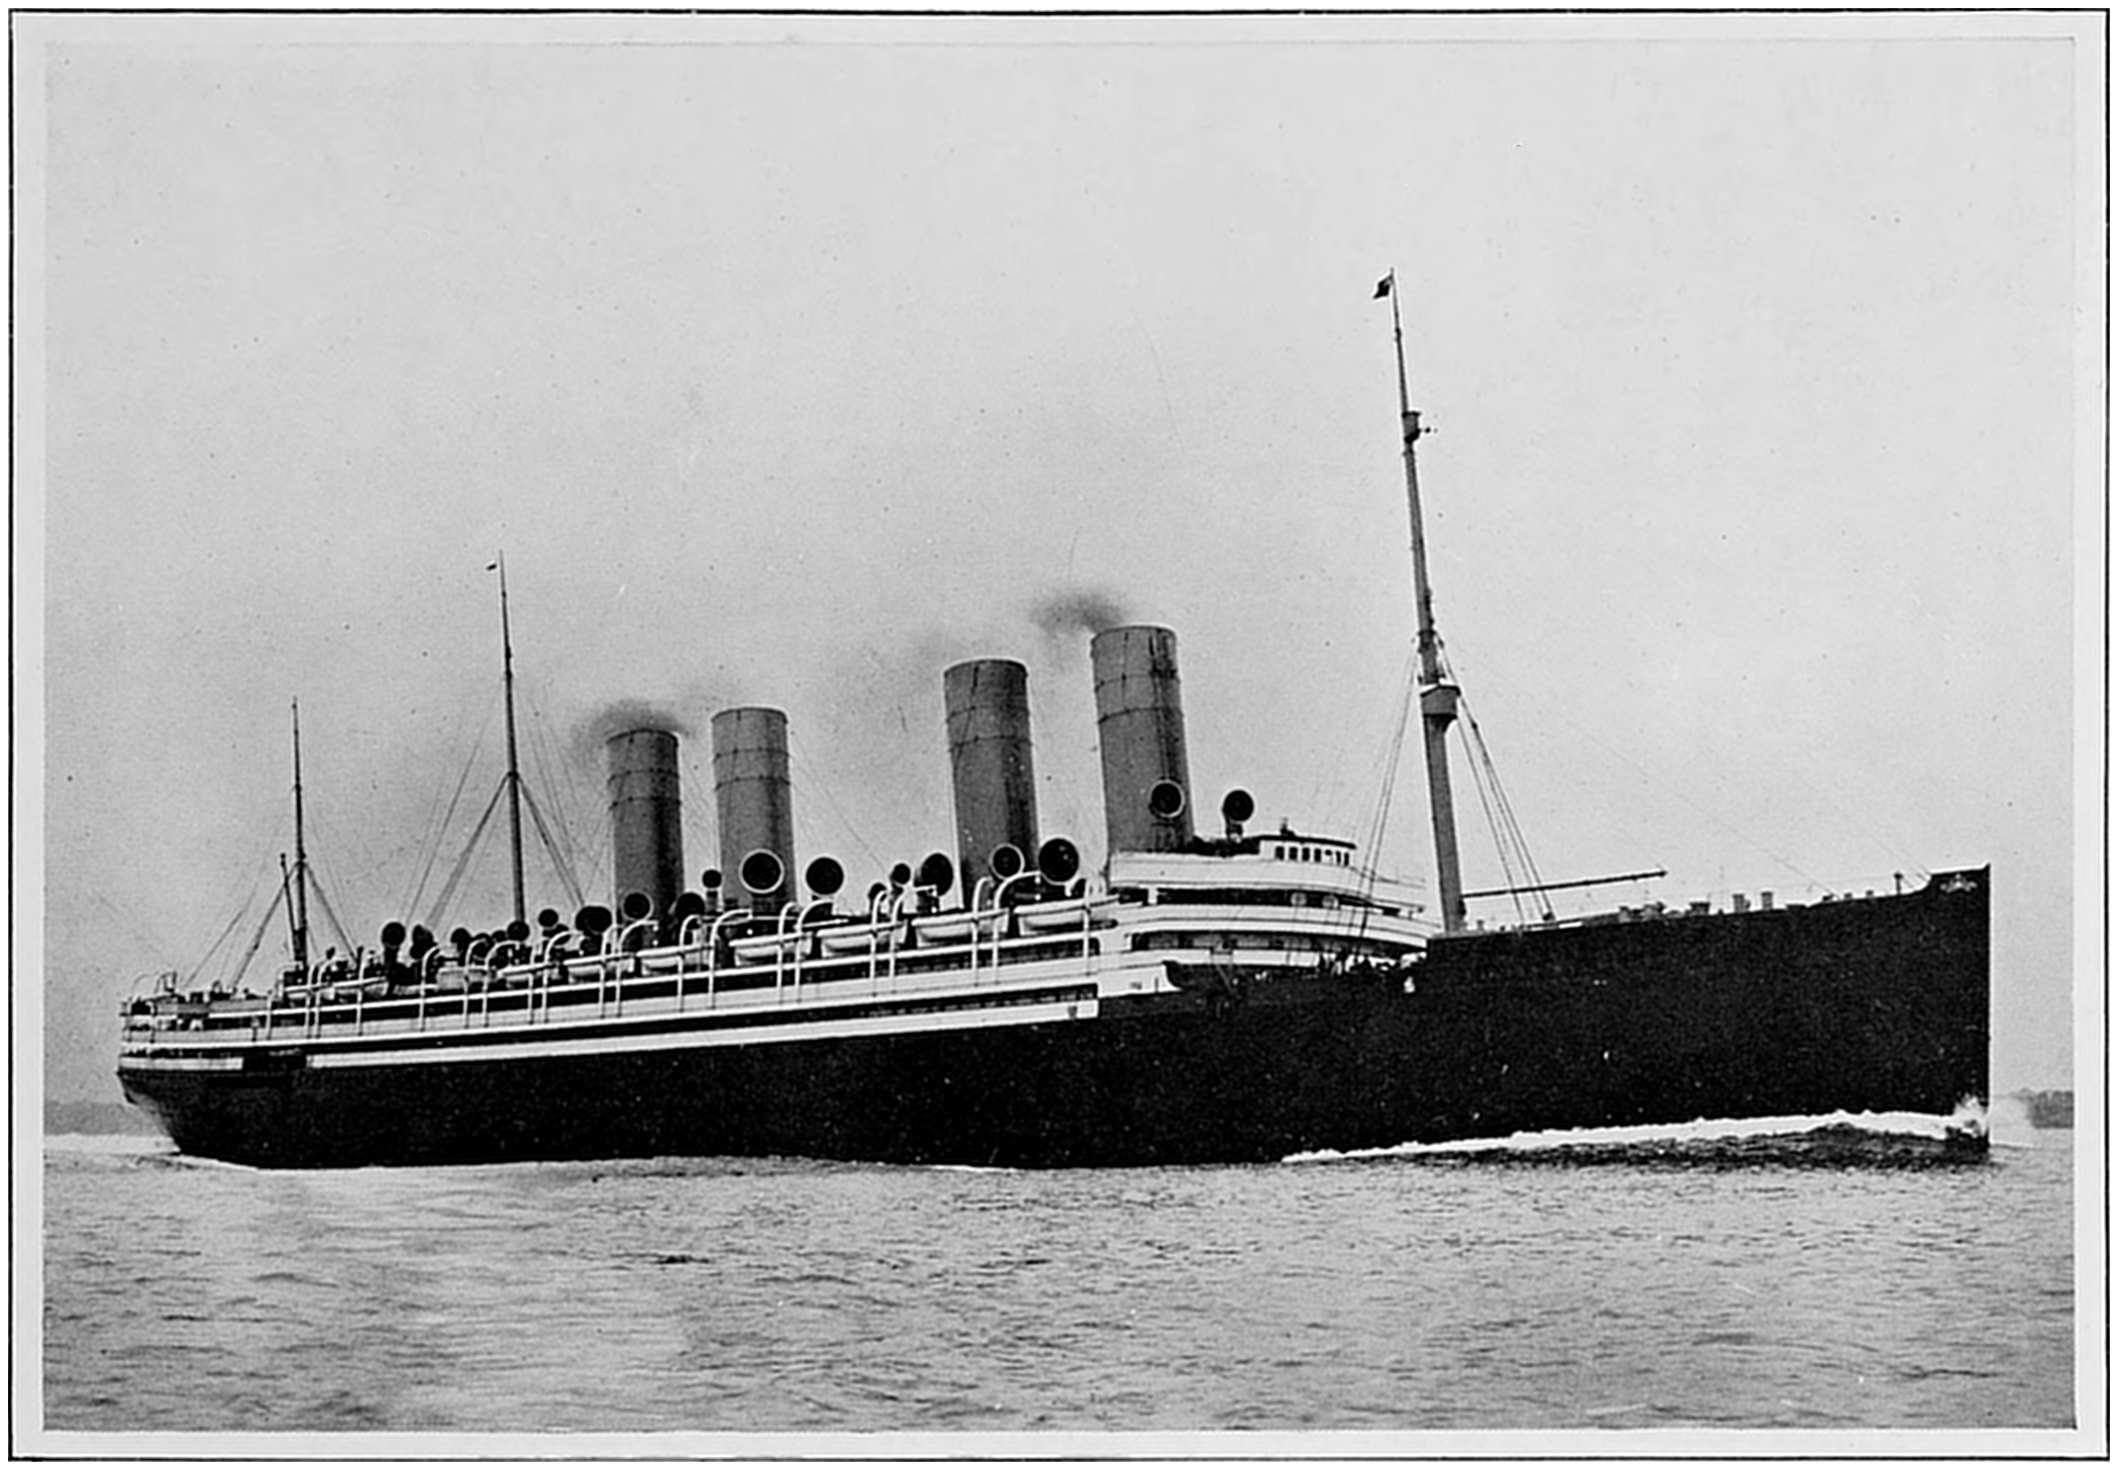 Steamships and Their Story